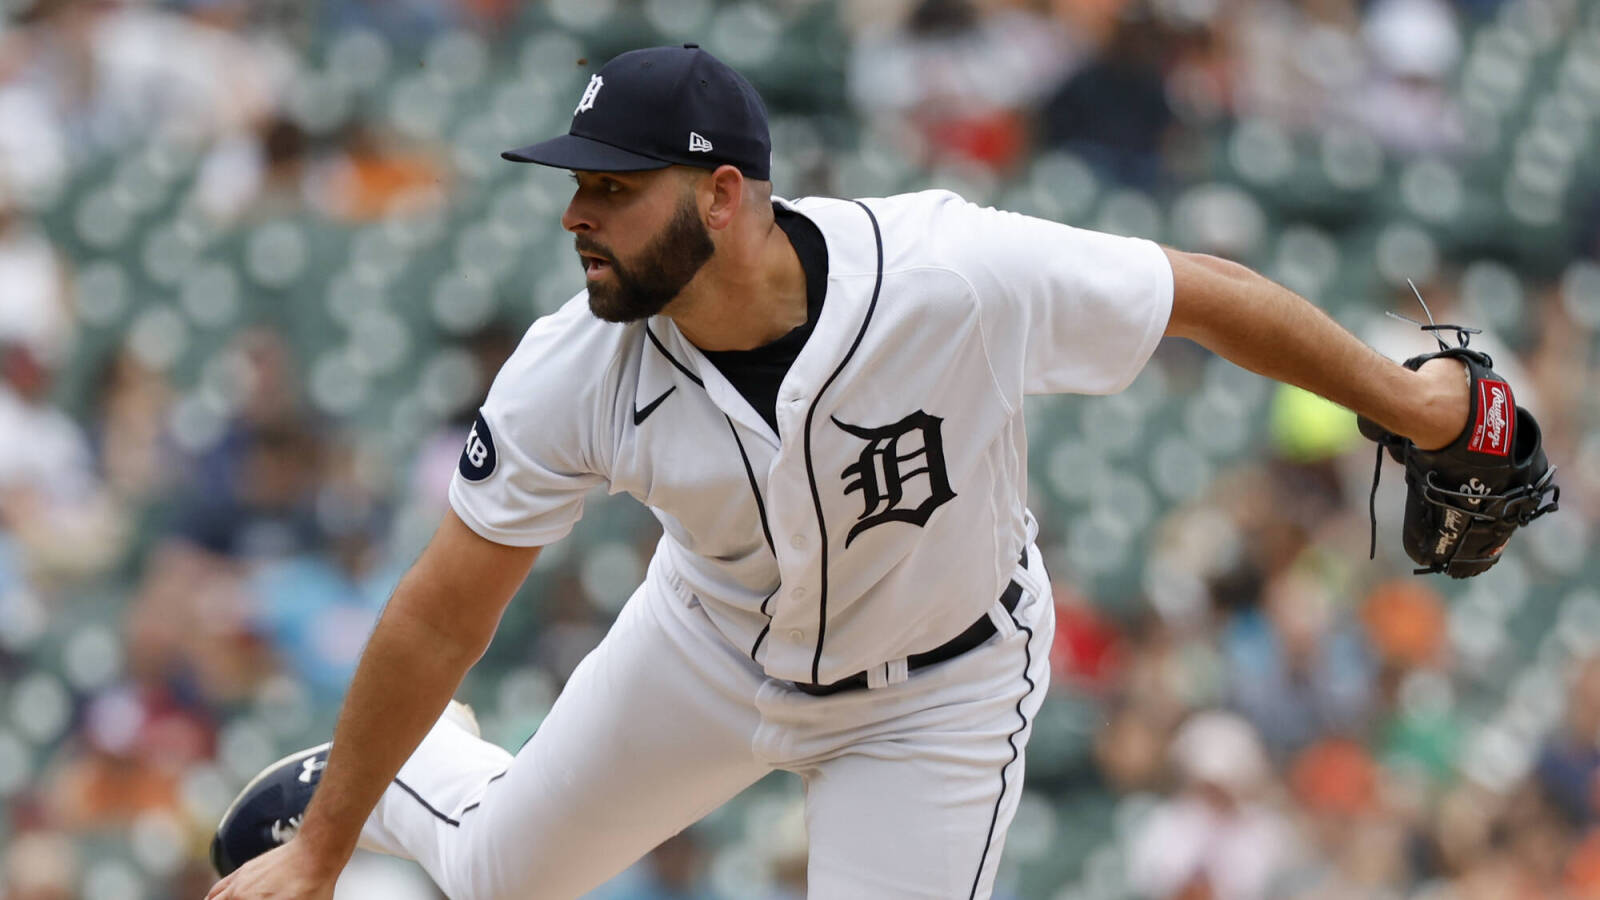 Tigers should expect inquiries about availability of bullpen arms